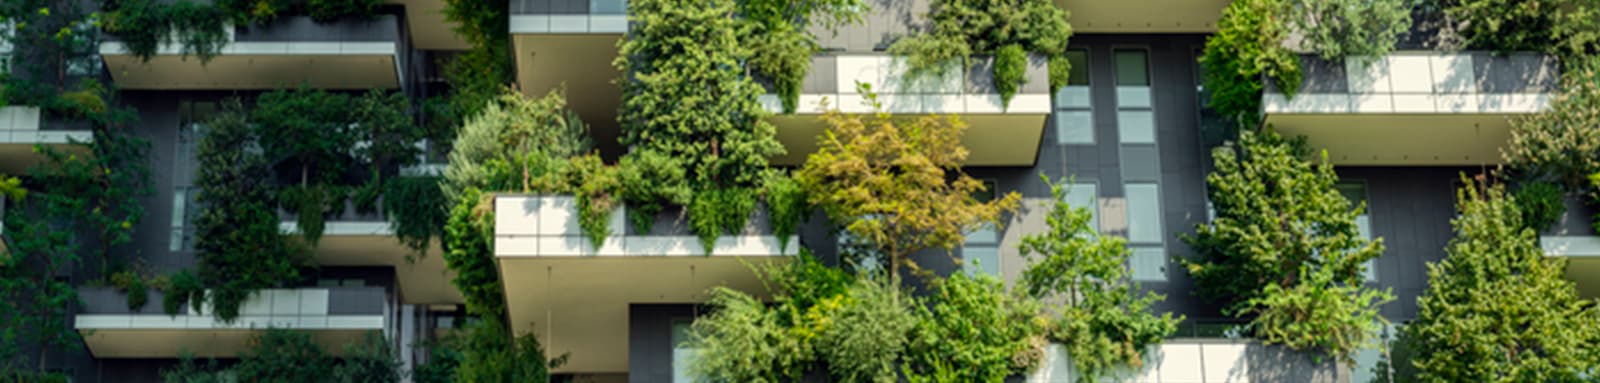 Leafy balconies on highrise building